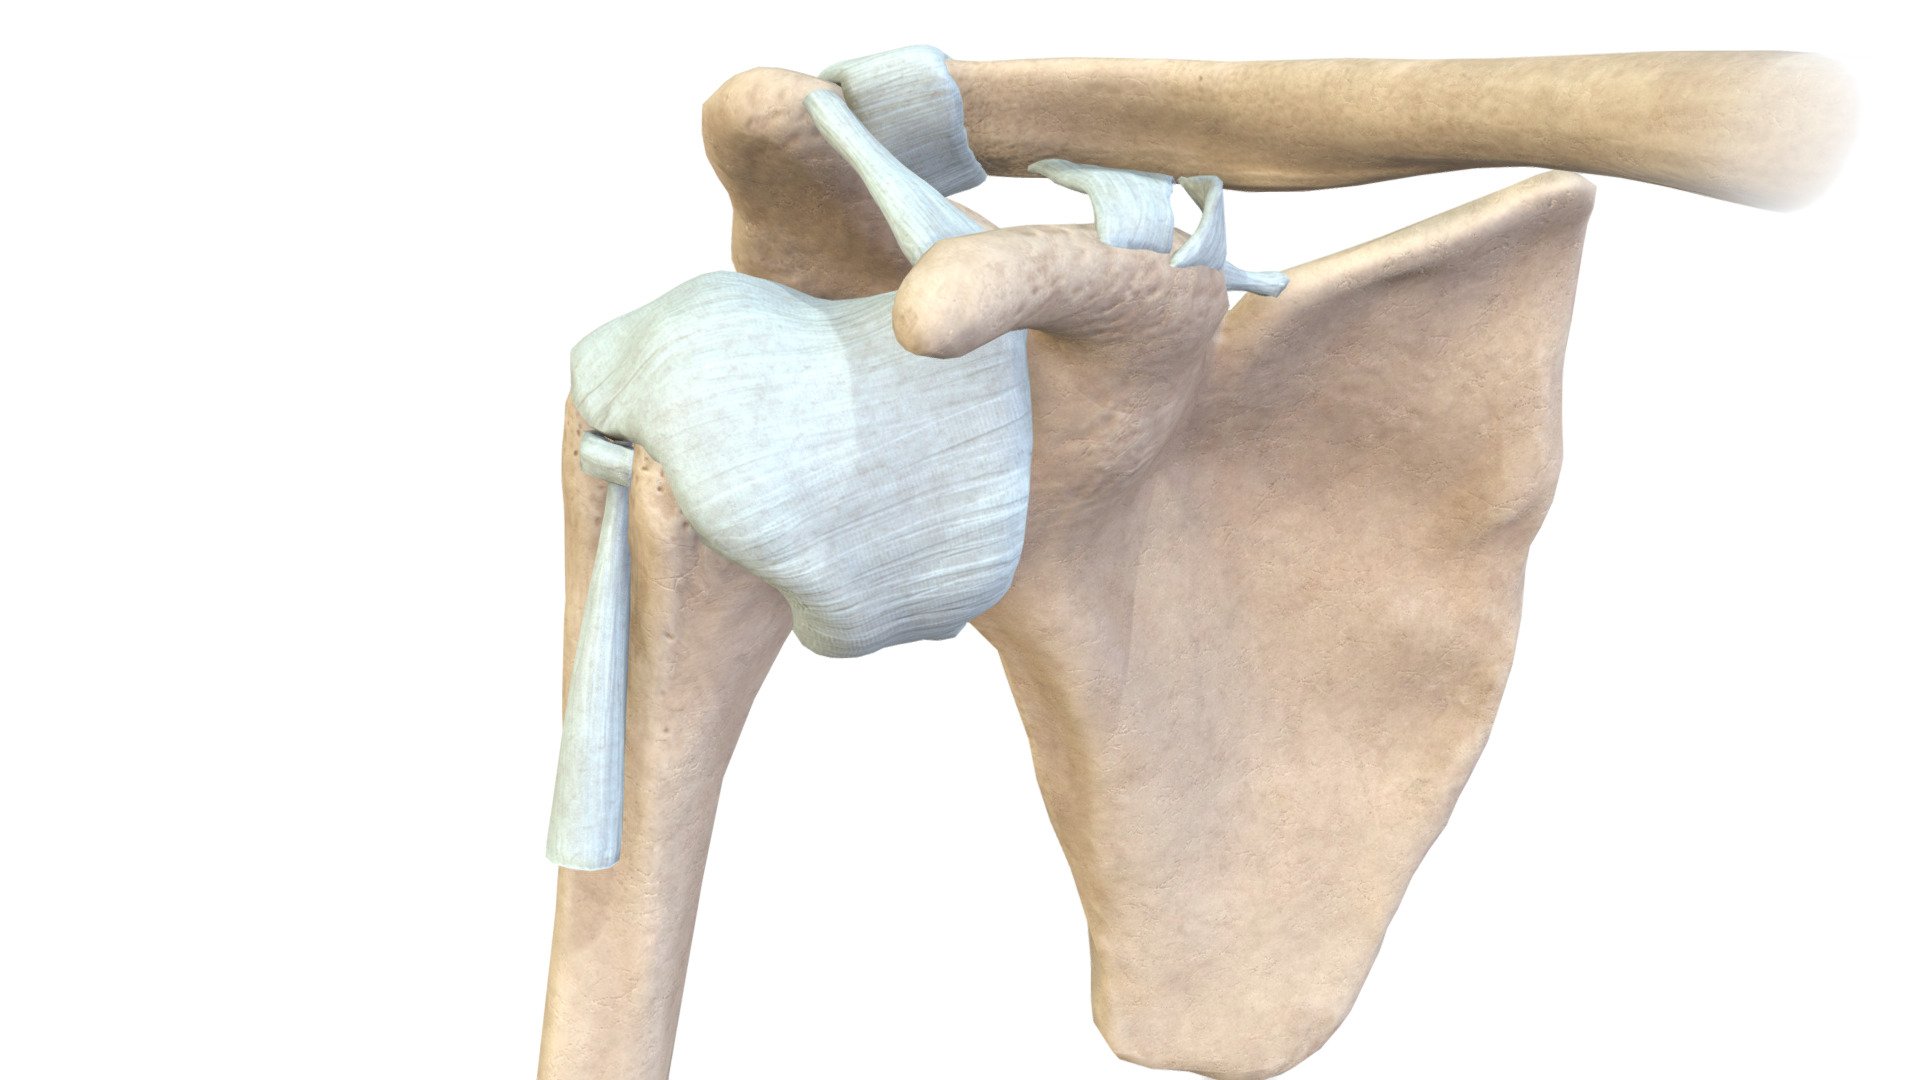 Joints & Ligaments of Pectoral Girdle 